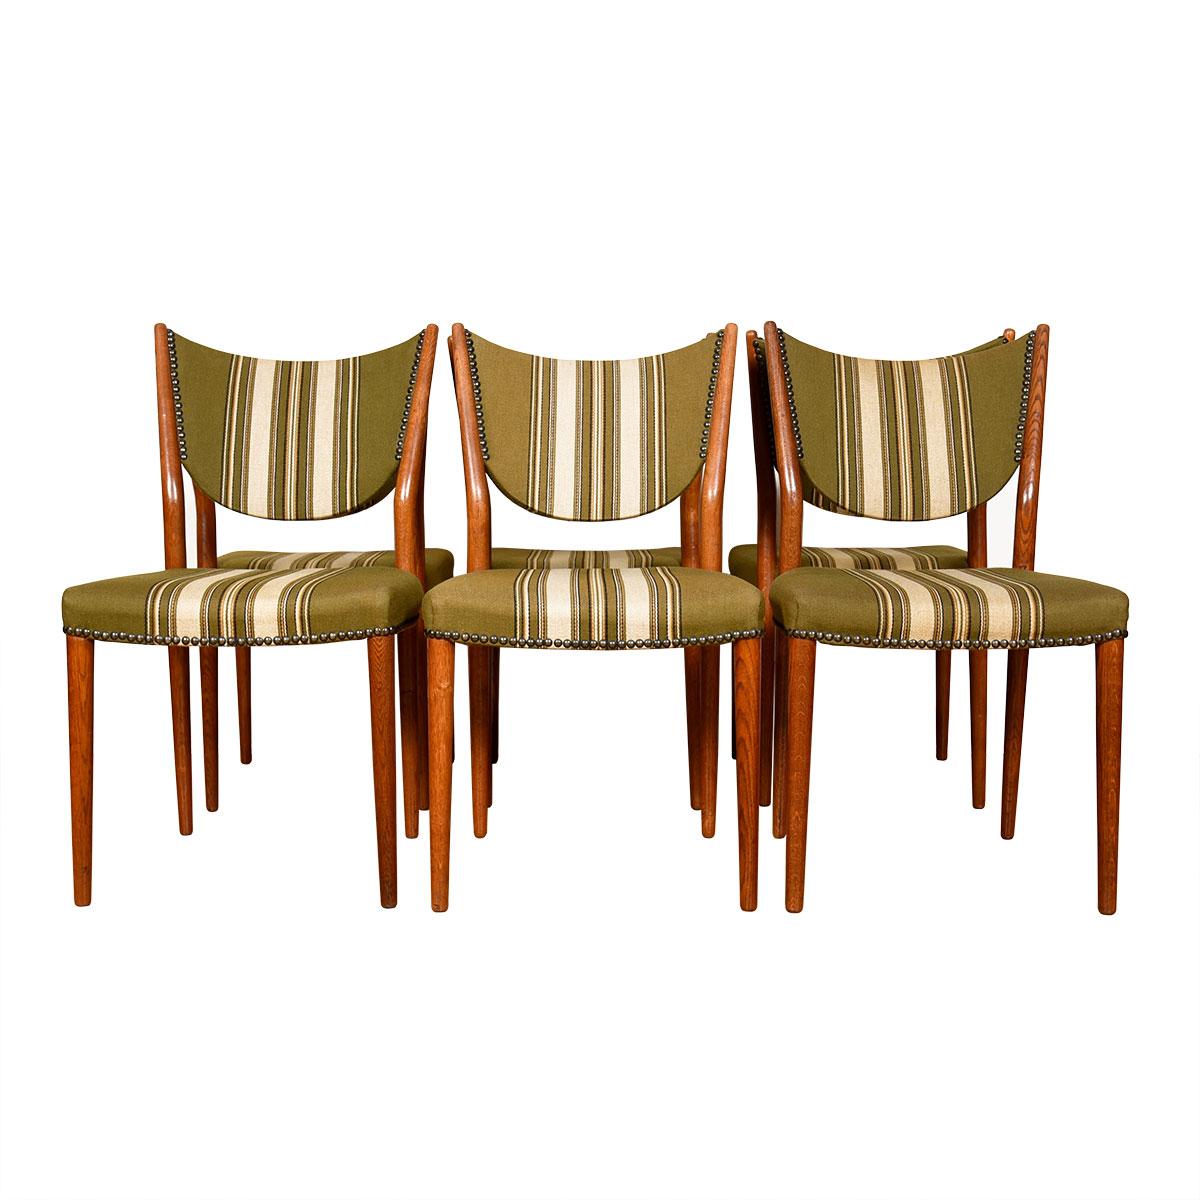 Set of 6 Danish Modern Dining Chairs with Striped Upholstery

Additional information:
Material: Upholstery
Featured at Kensington: 
The traditional shield-shape back goes modern on these beautiful Danish modern chairs.
Fully upholstered seat